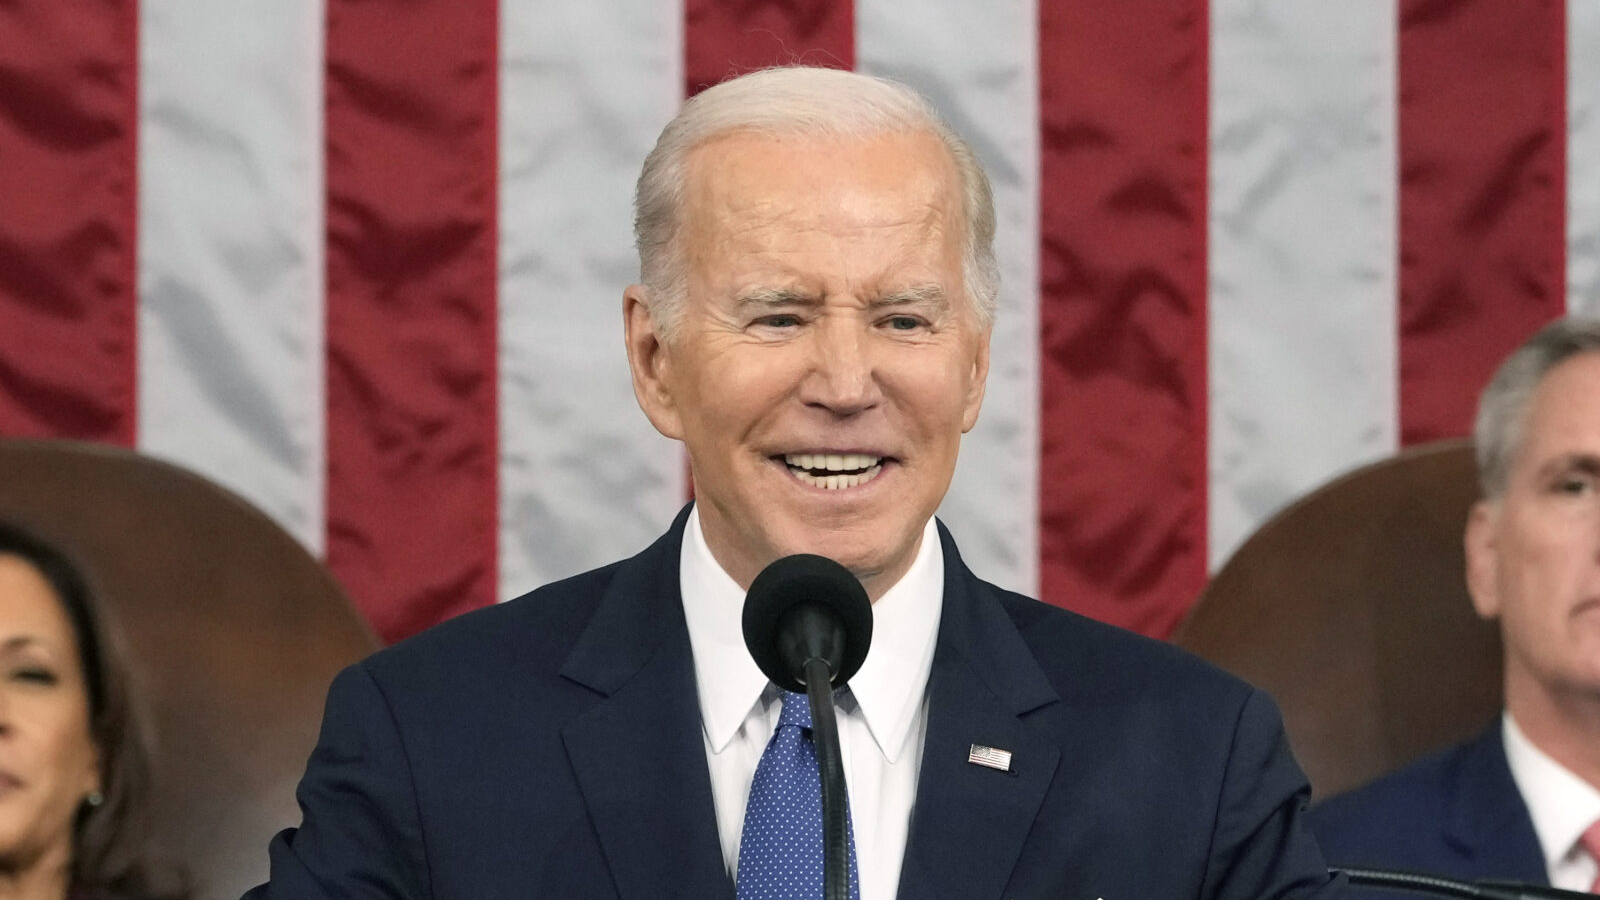 Everything You Need to Know About Biden’s State of The Union Address